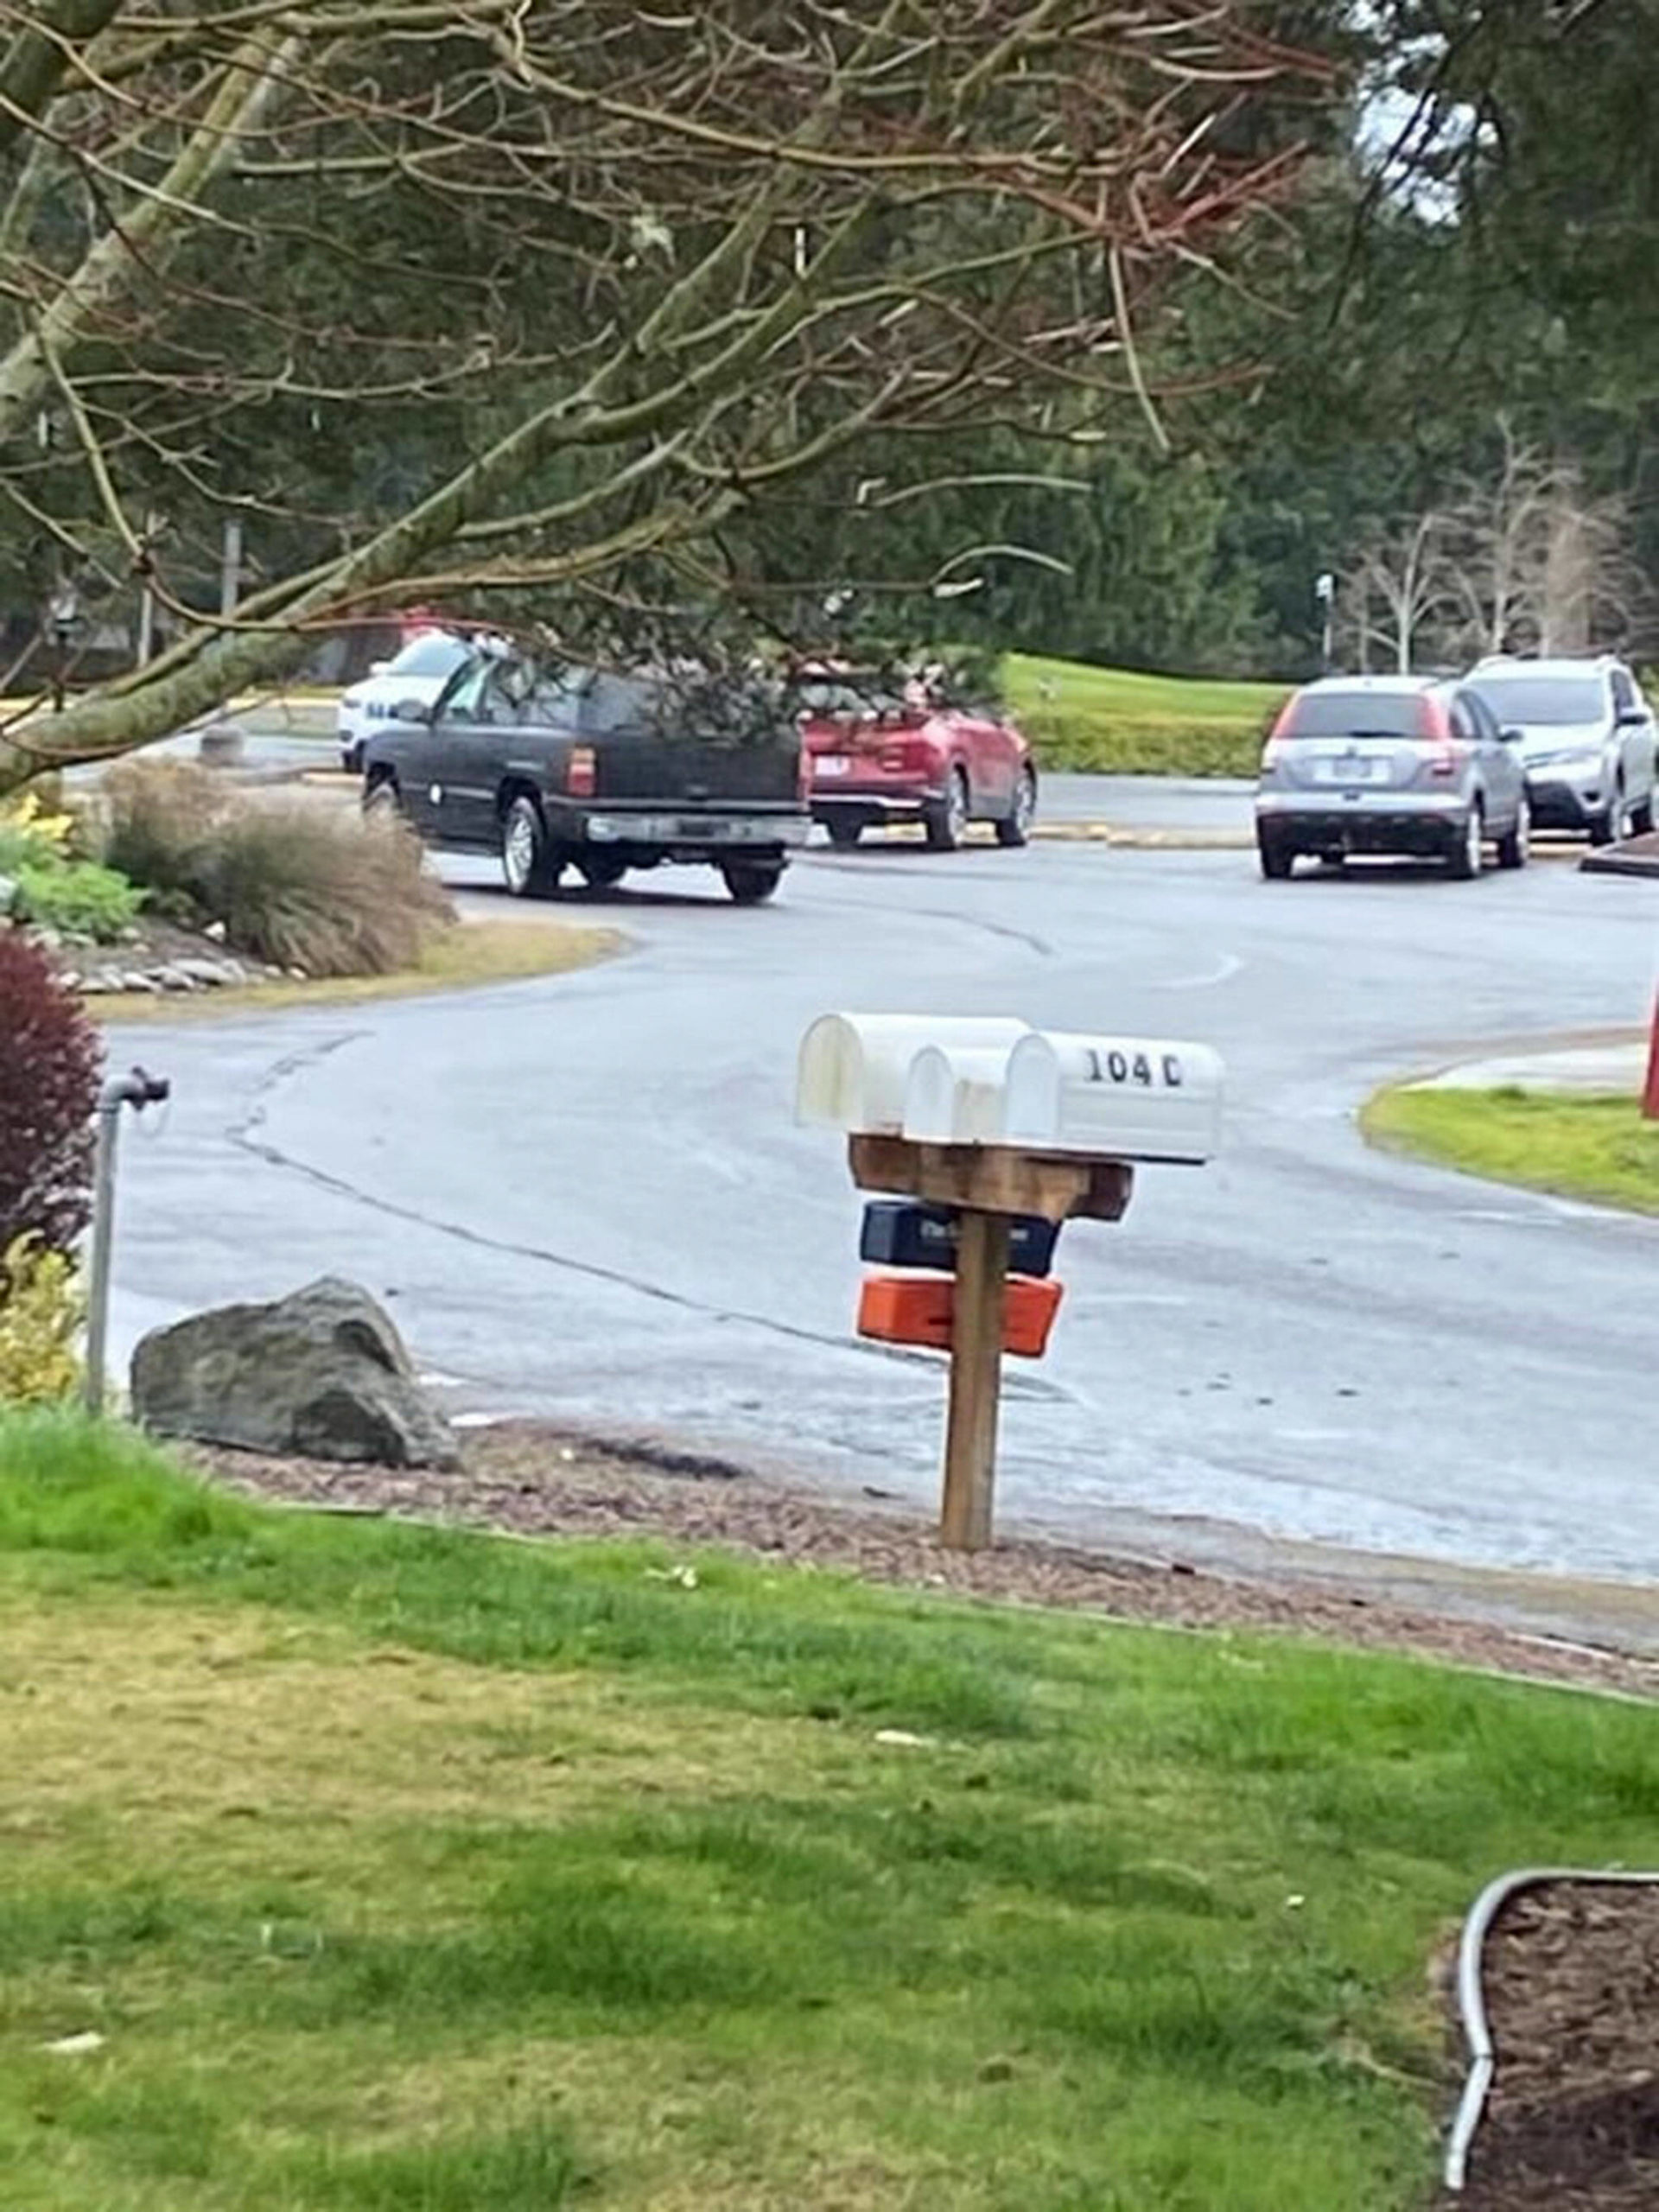 Photo courtesy of Clallam County Sheriff’s Office
A Sunland resident snapped this Chevrolet Tahoe driving away on March 23 after the unknown driver allegedly burglarized a home and took a pistol before abandoning the vehicle at the John Wayne Marina. Law enforcement continue to seek tips about the suspect and burglary.